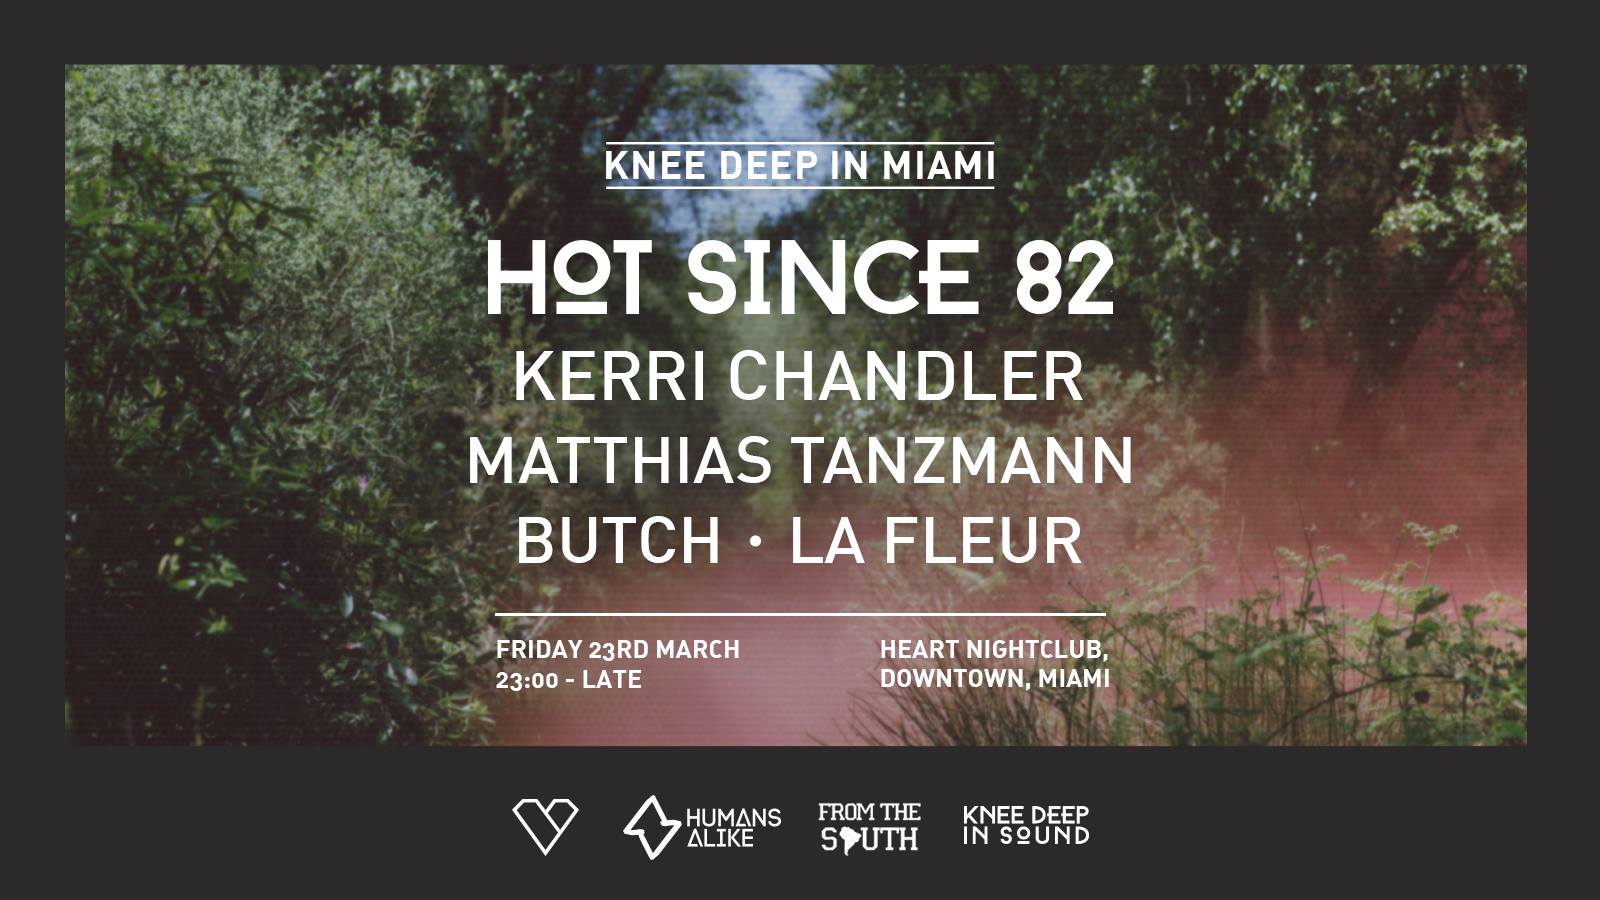 Hot Since 82 presents KNEE DEEP in MIAMI Image